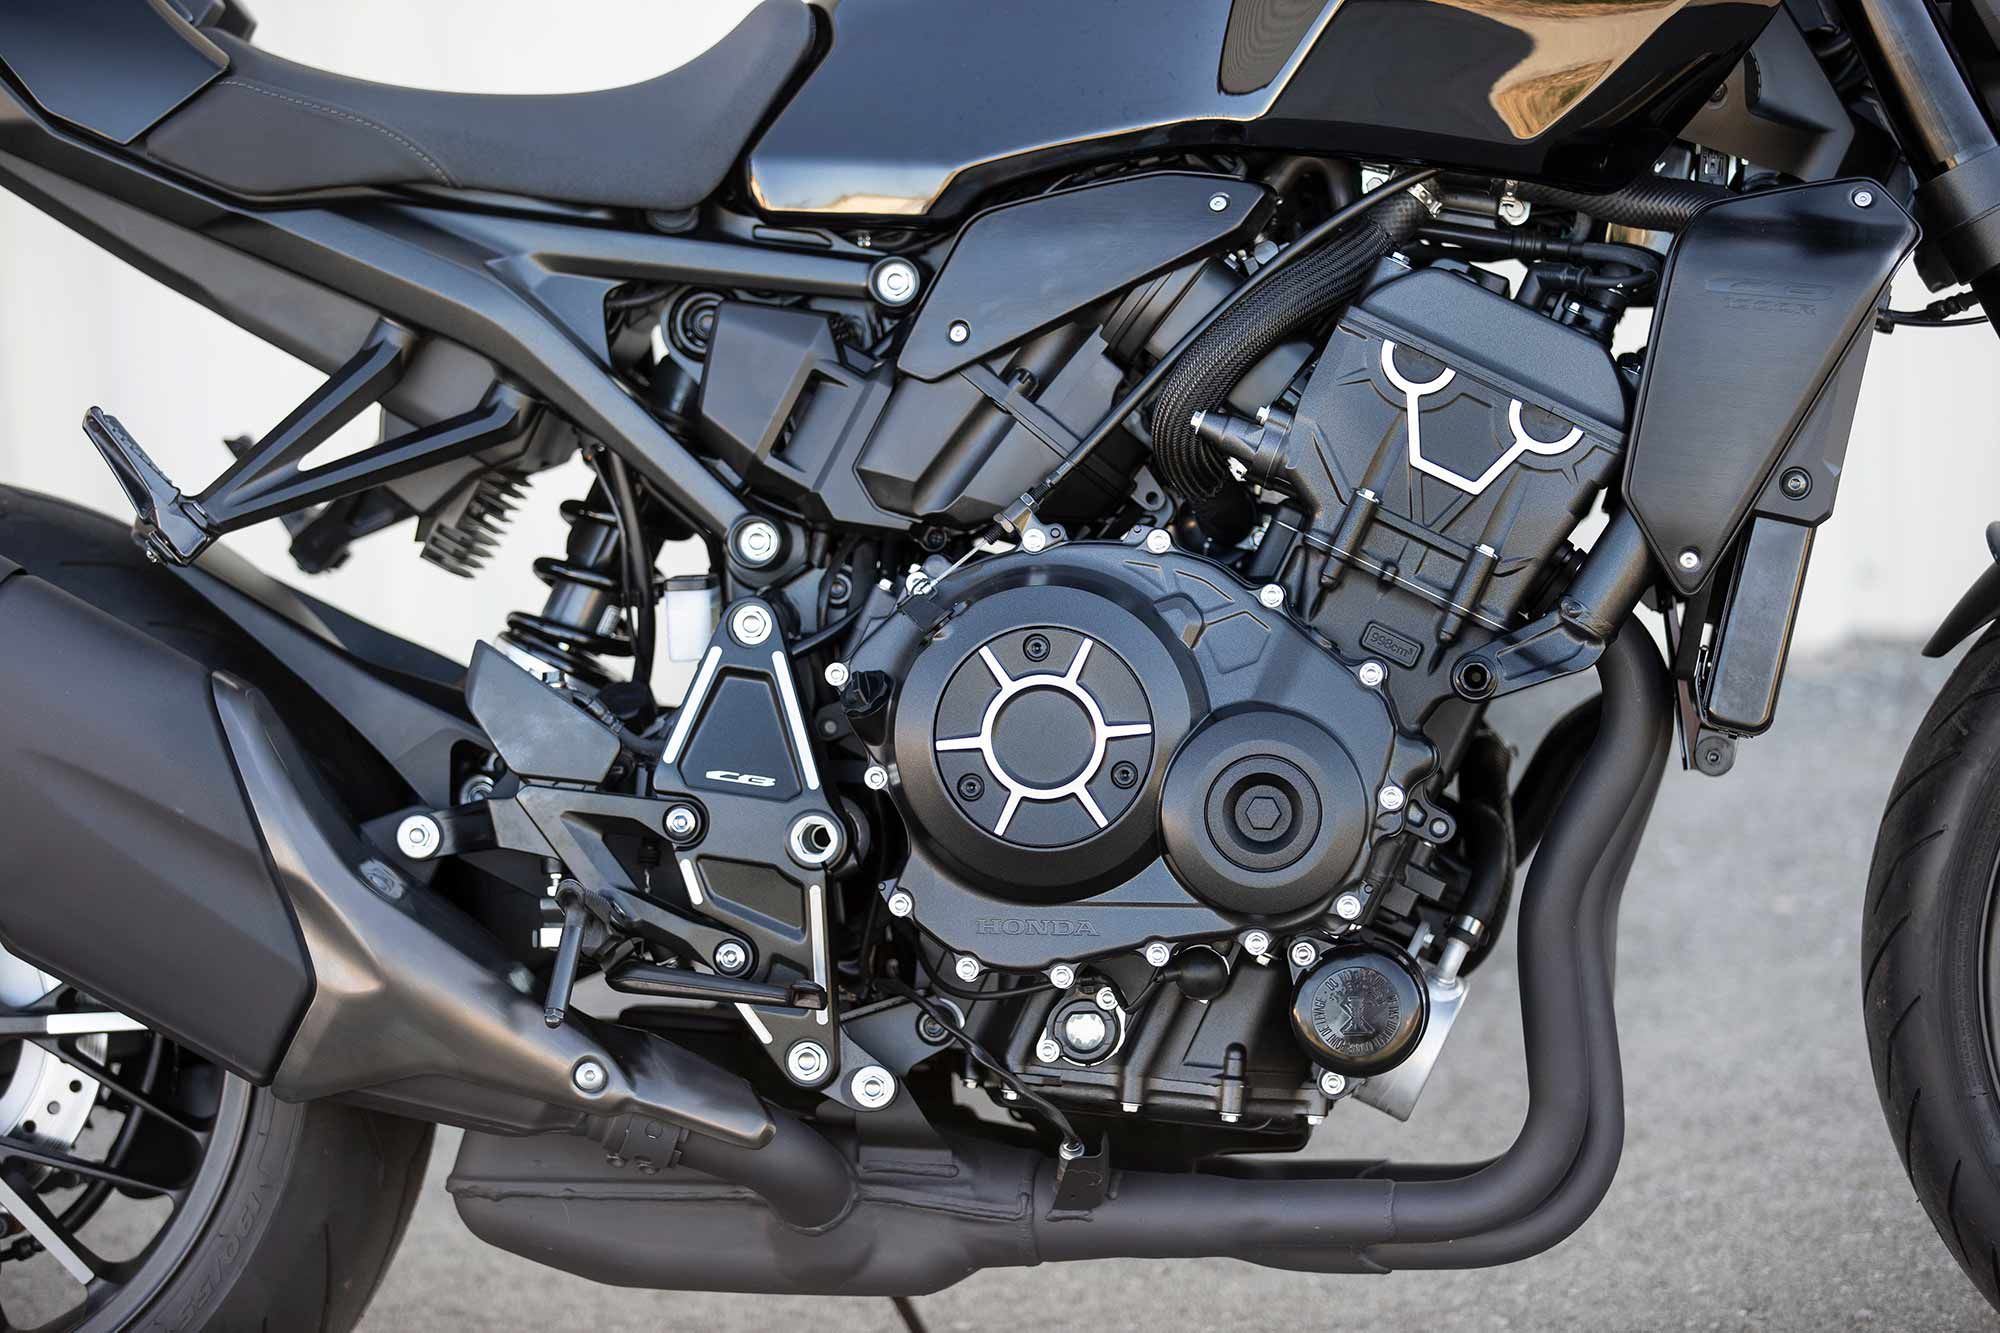 The CB1000R is powered by a previous-generation CBR1000RR superbike 998cc DOHC inline-four powerplant adapted to everyday rideability, worthy of about 120 hp on the <i>Motorcyclist</i> dyno.